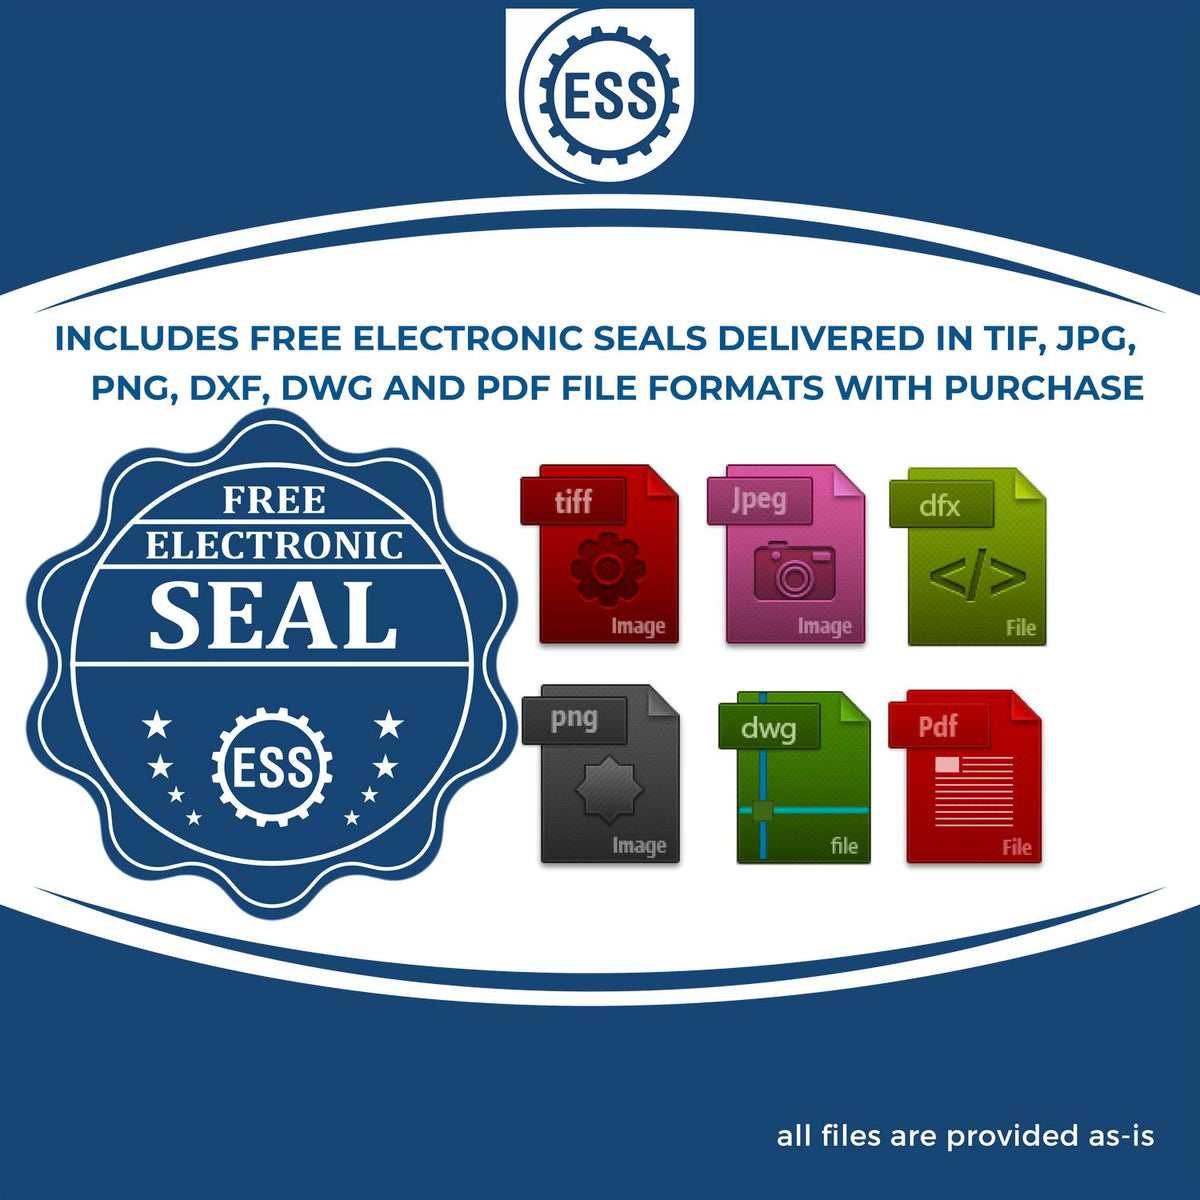 An infographic for the free electronic seal for the State of Alaska Long Reach Architectural Embossing Seal illustrating the different file type icons such as DXF, DWG, TIF, JPG and PNG.